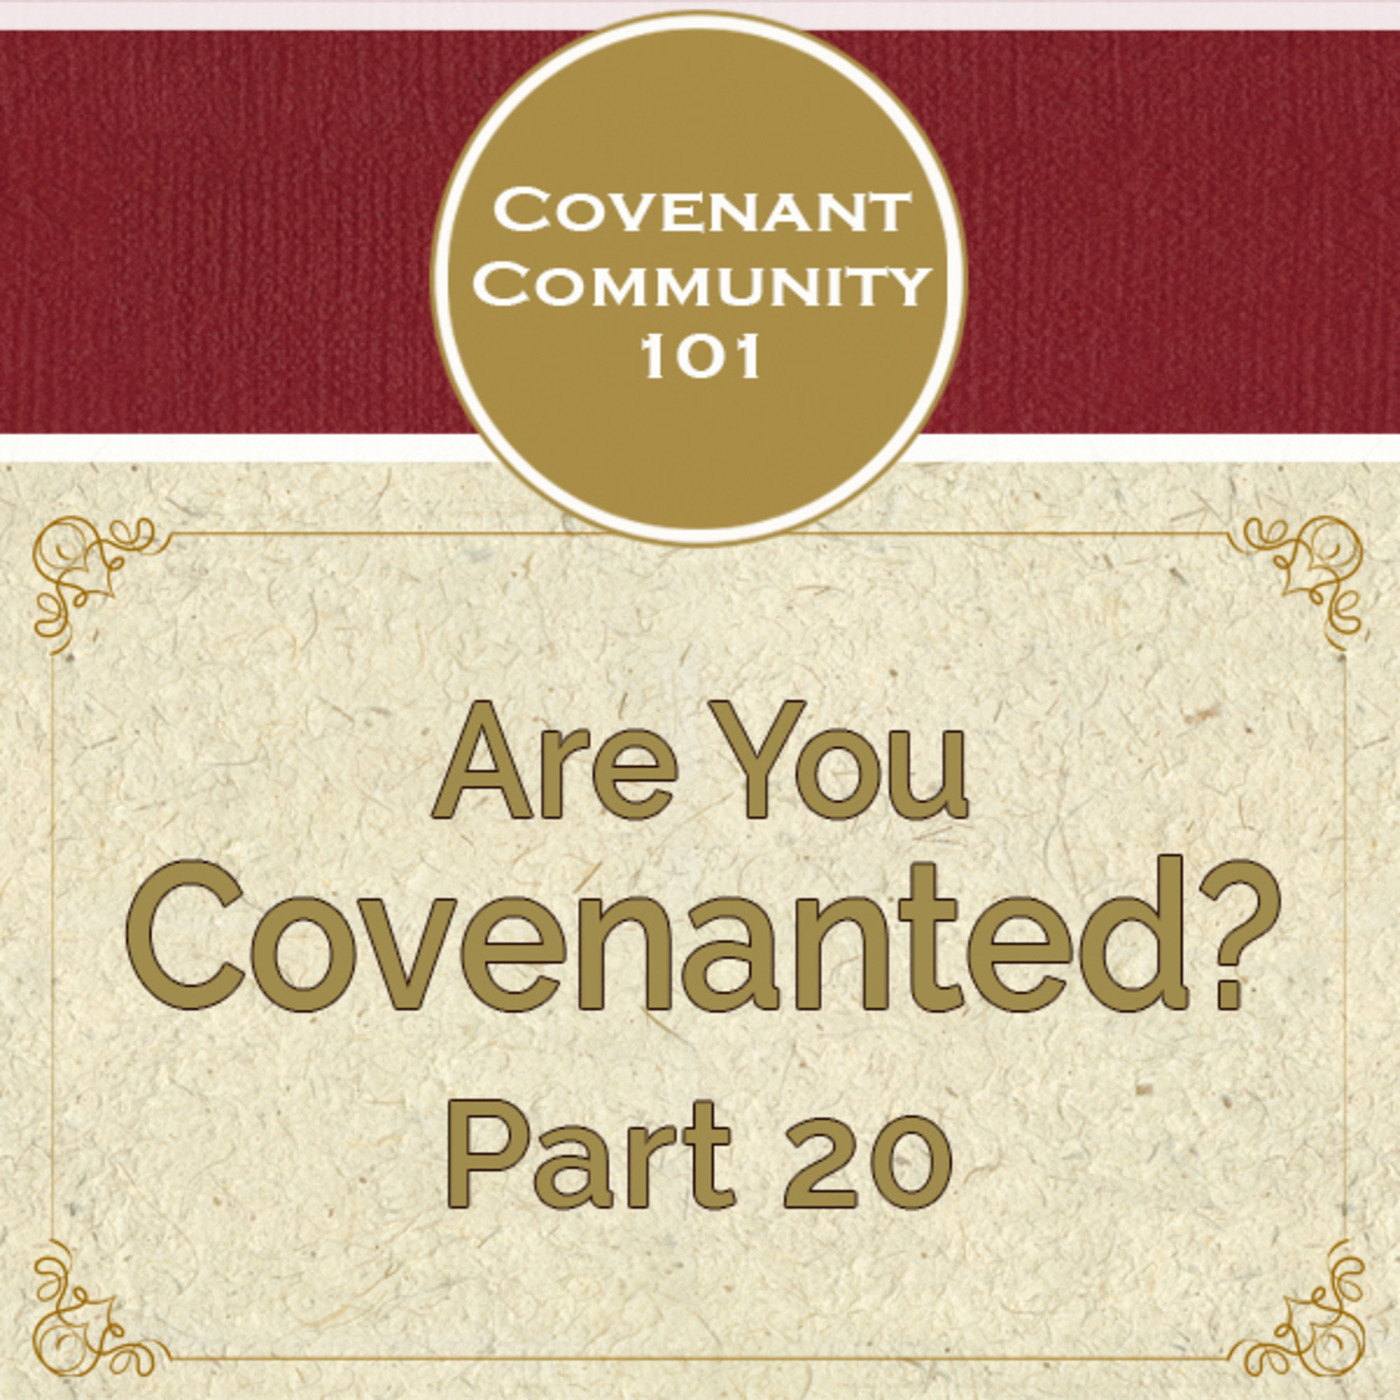 Covenant Community 101: Are You Covenanted? Part 20